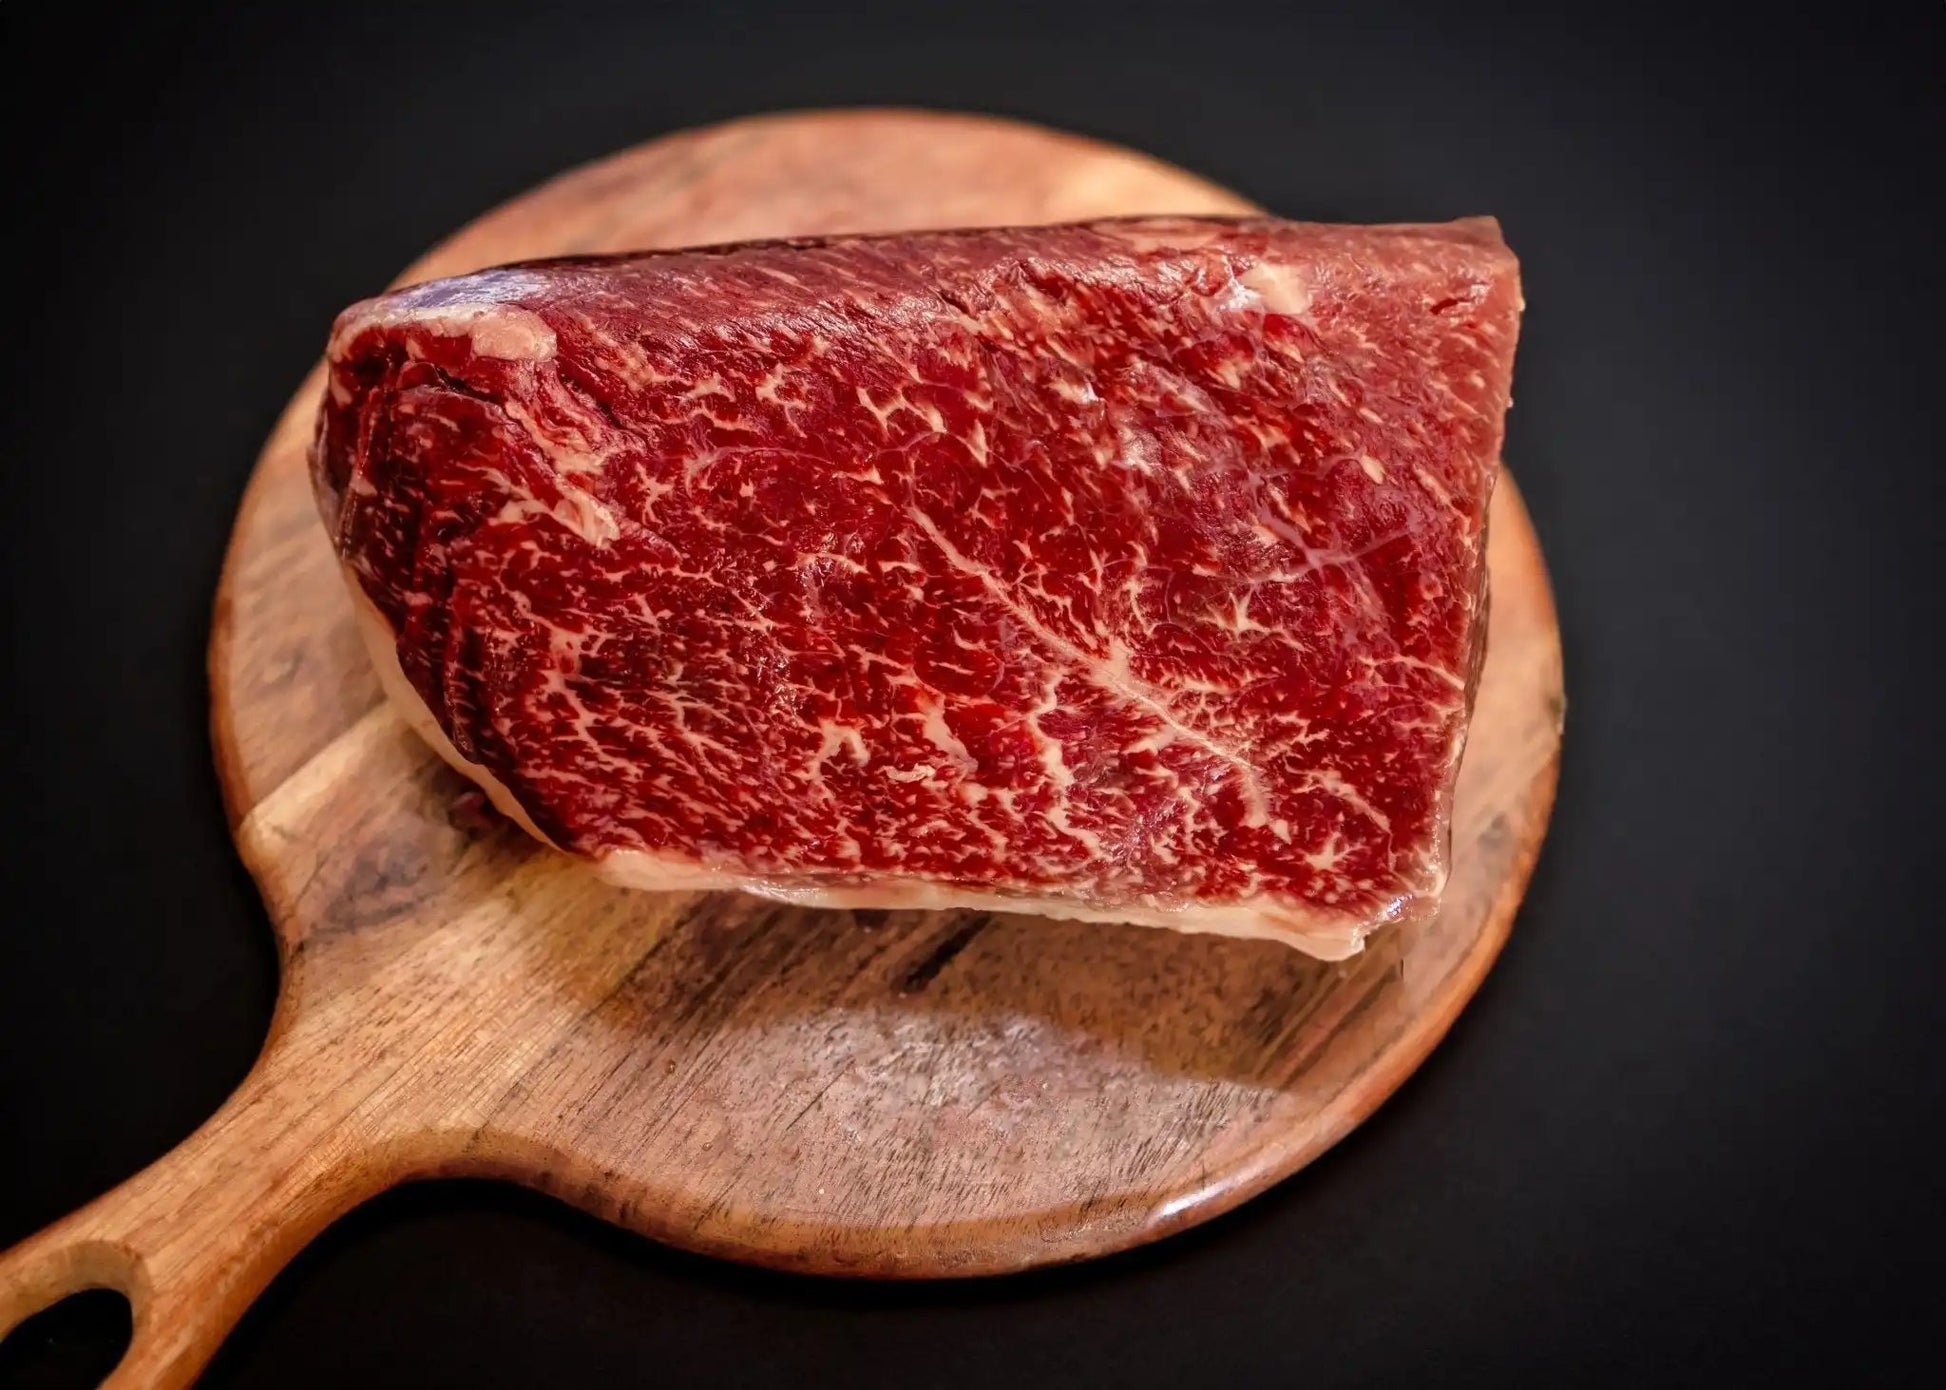 100% All-Natural Grass-Fed Pasture-Raised Wagyu Rump Roast - The Hufeisen-Ranch (WYO Wagyu)